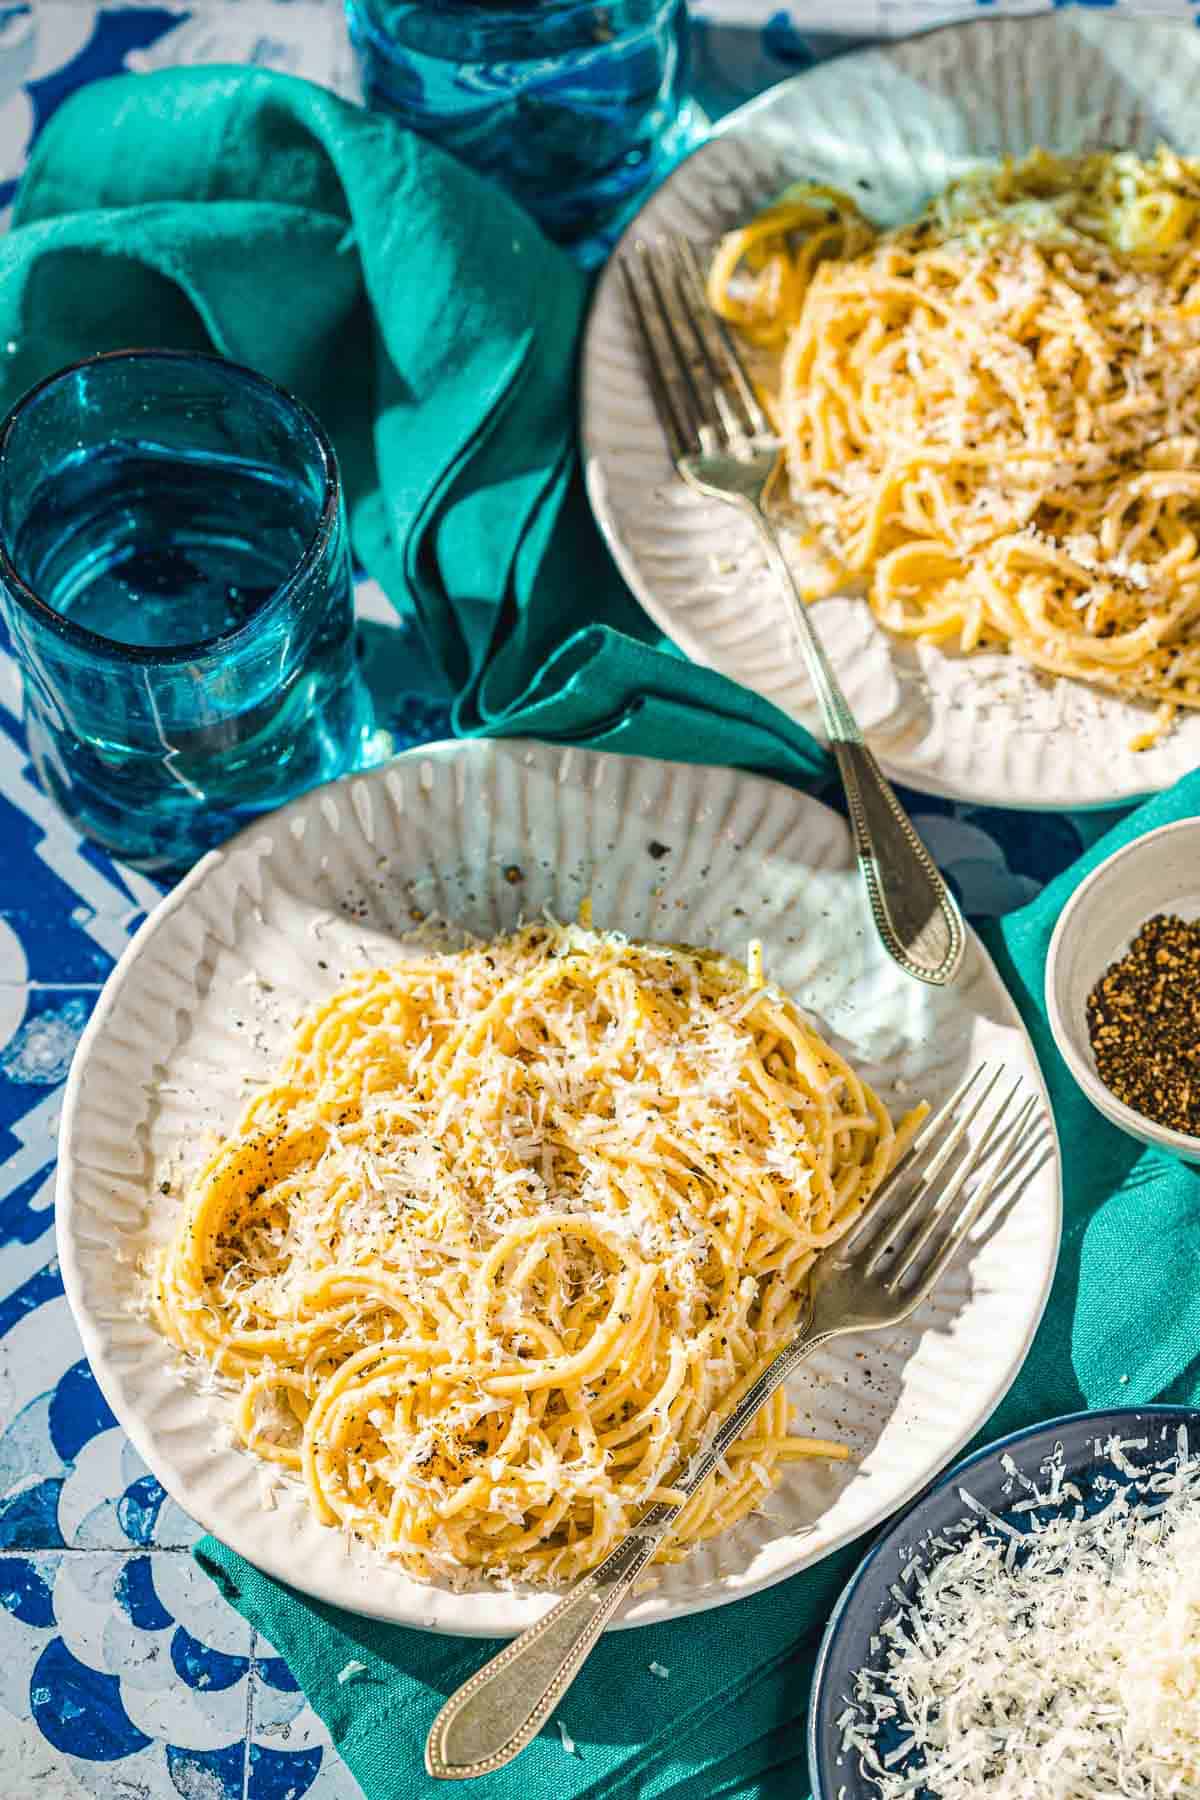 Where can one find the best cacio e pepe? Wherever it may be, our